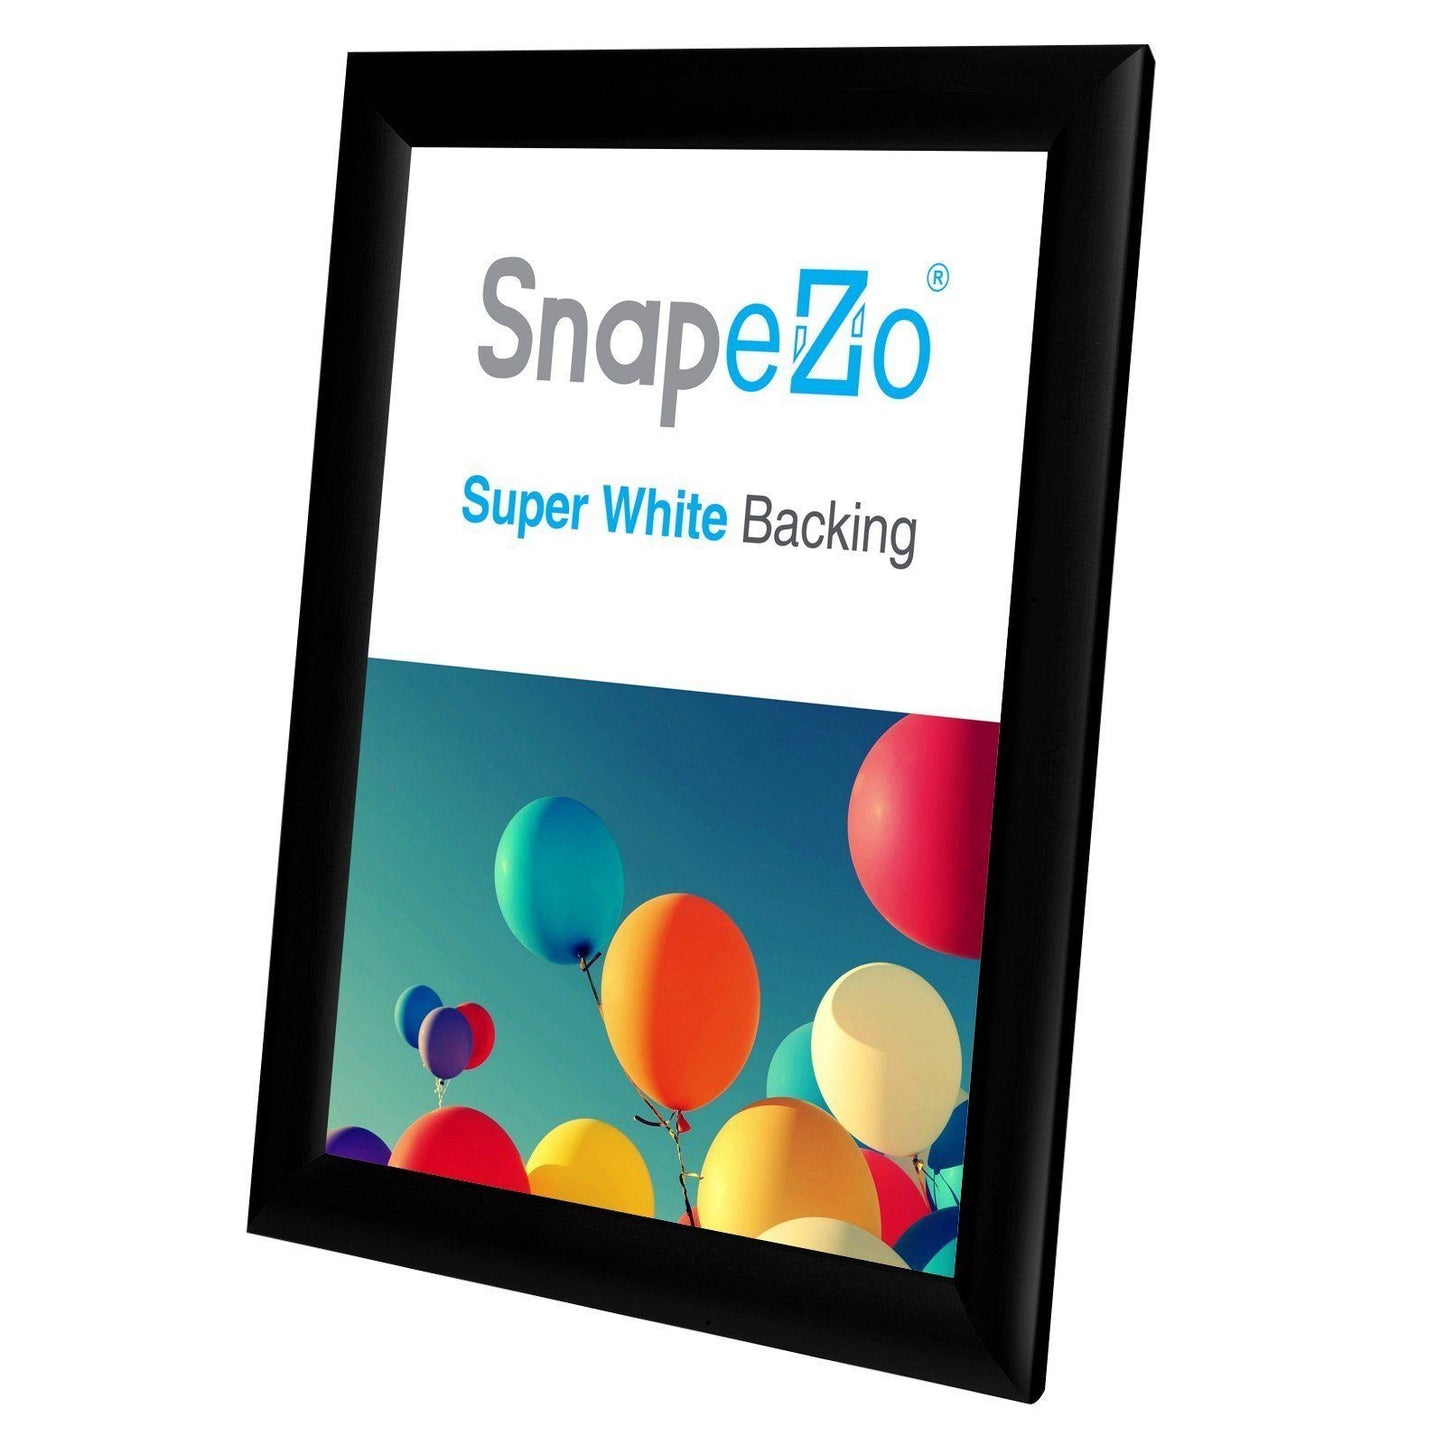 Load image into Gallery viewer, 8.5x11 Black SnapeZo Snap Frame - 1 Inch Profile
